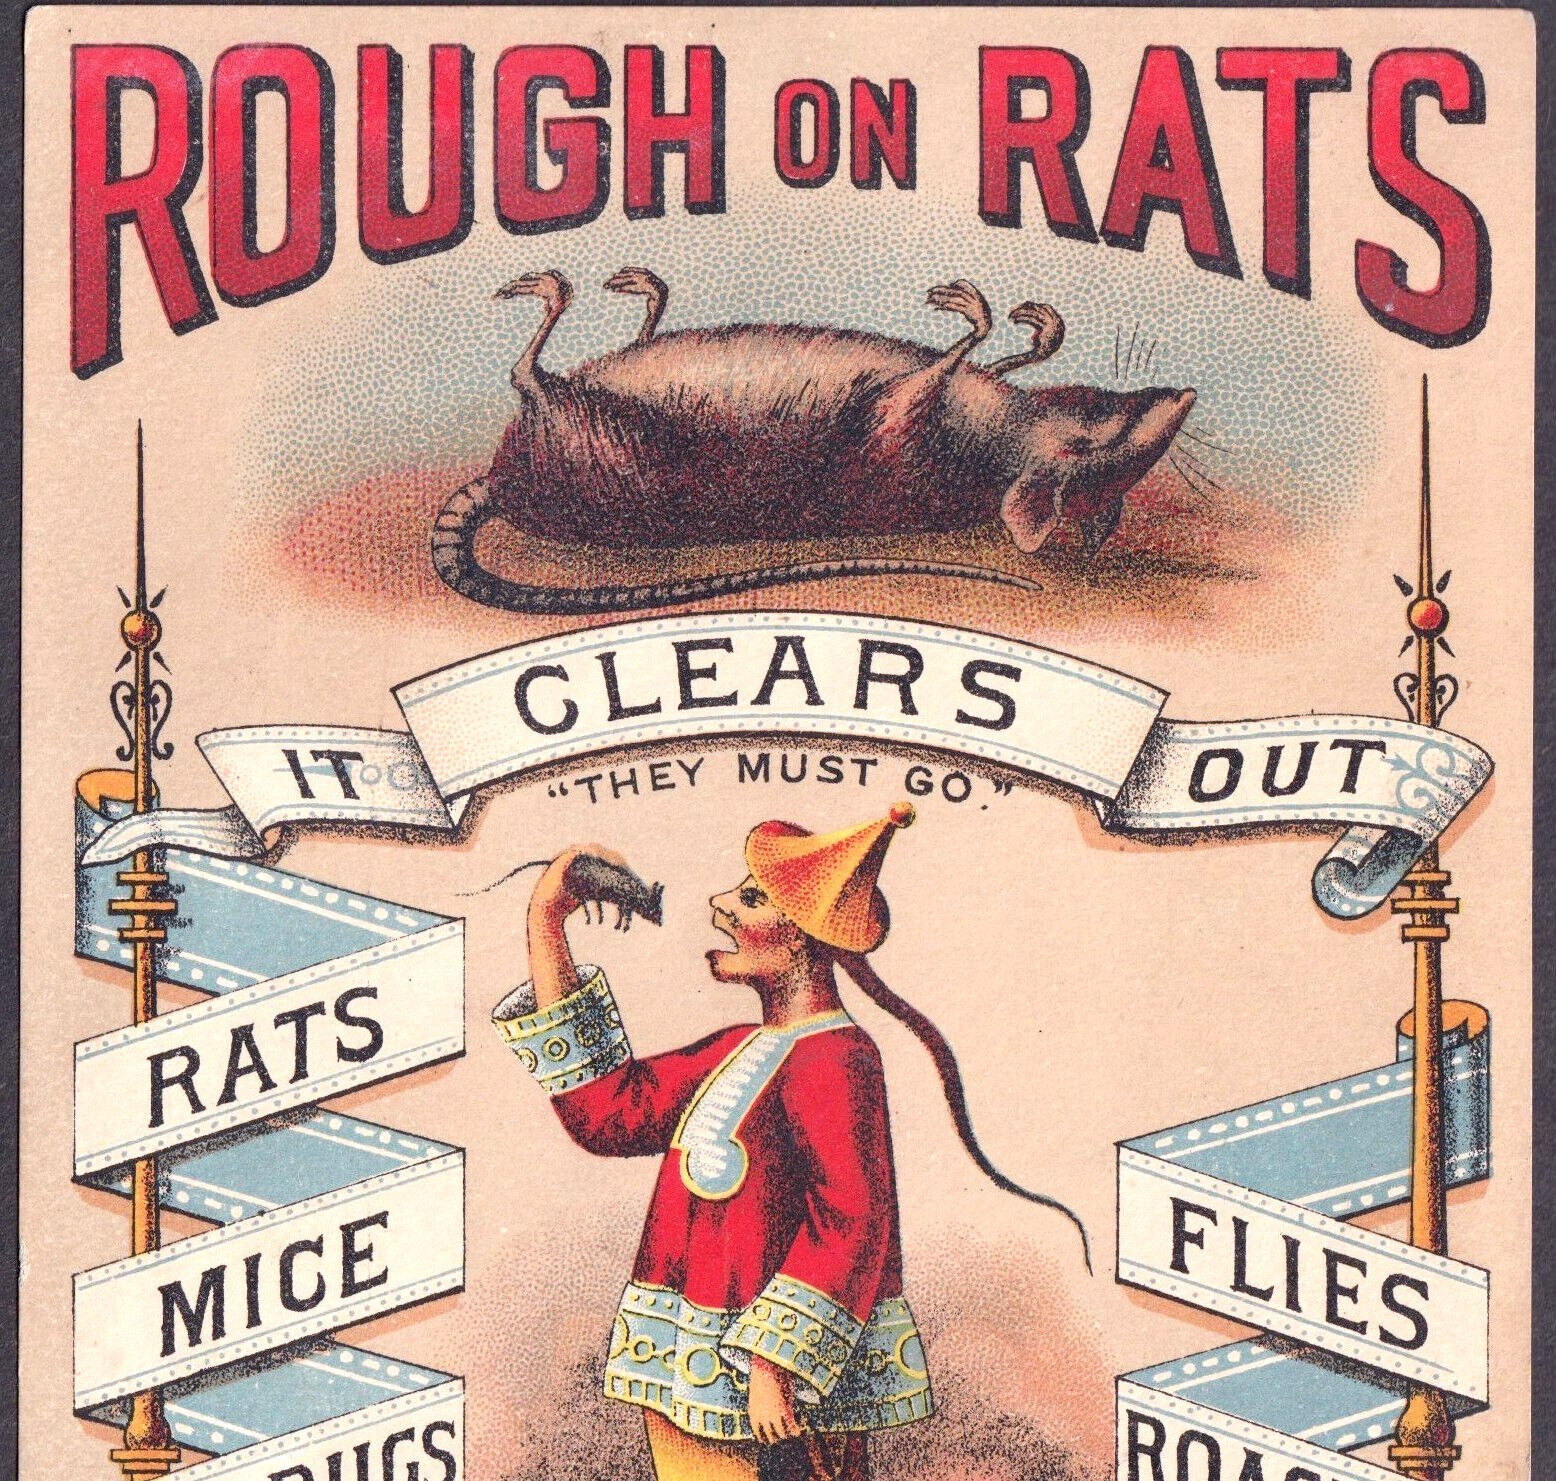 Rough on Rats Classic Flaws HUGE Creepy Bug Pest Control Ad Victorian Trade Card